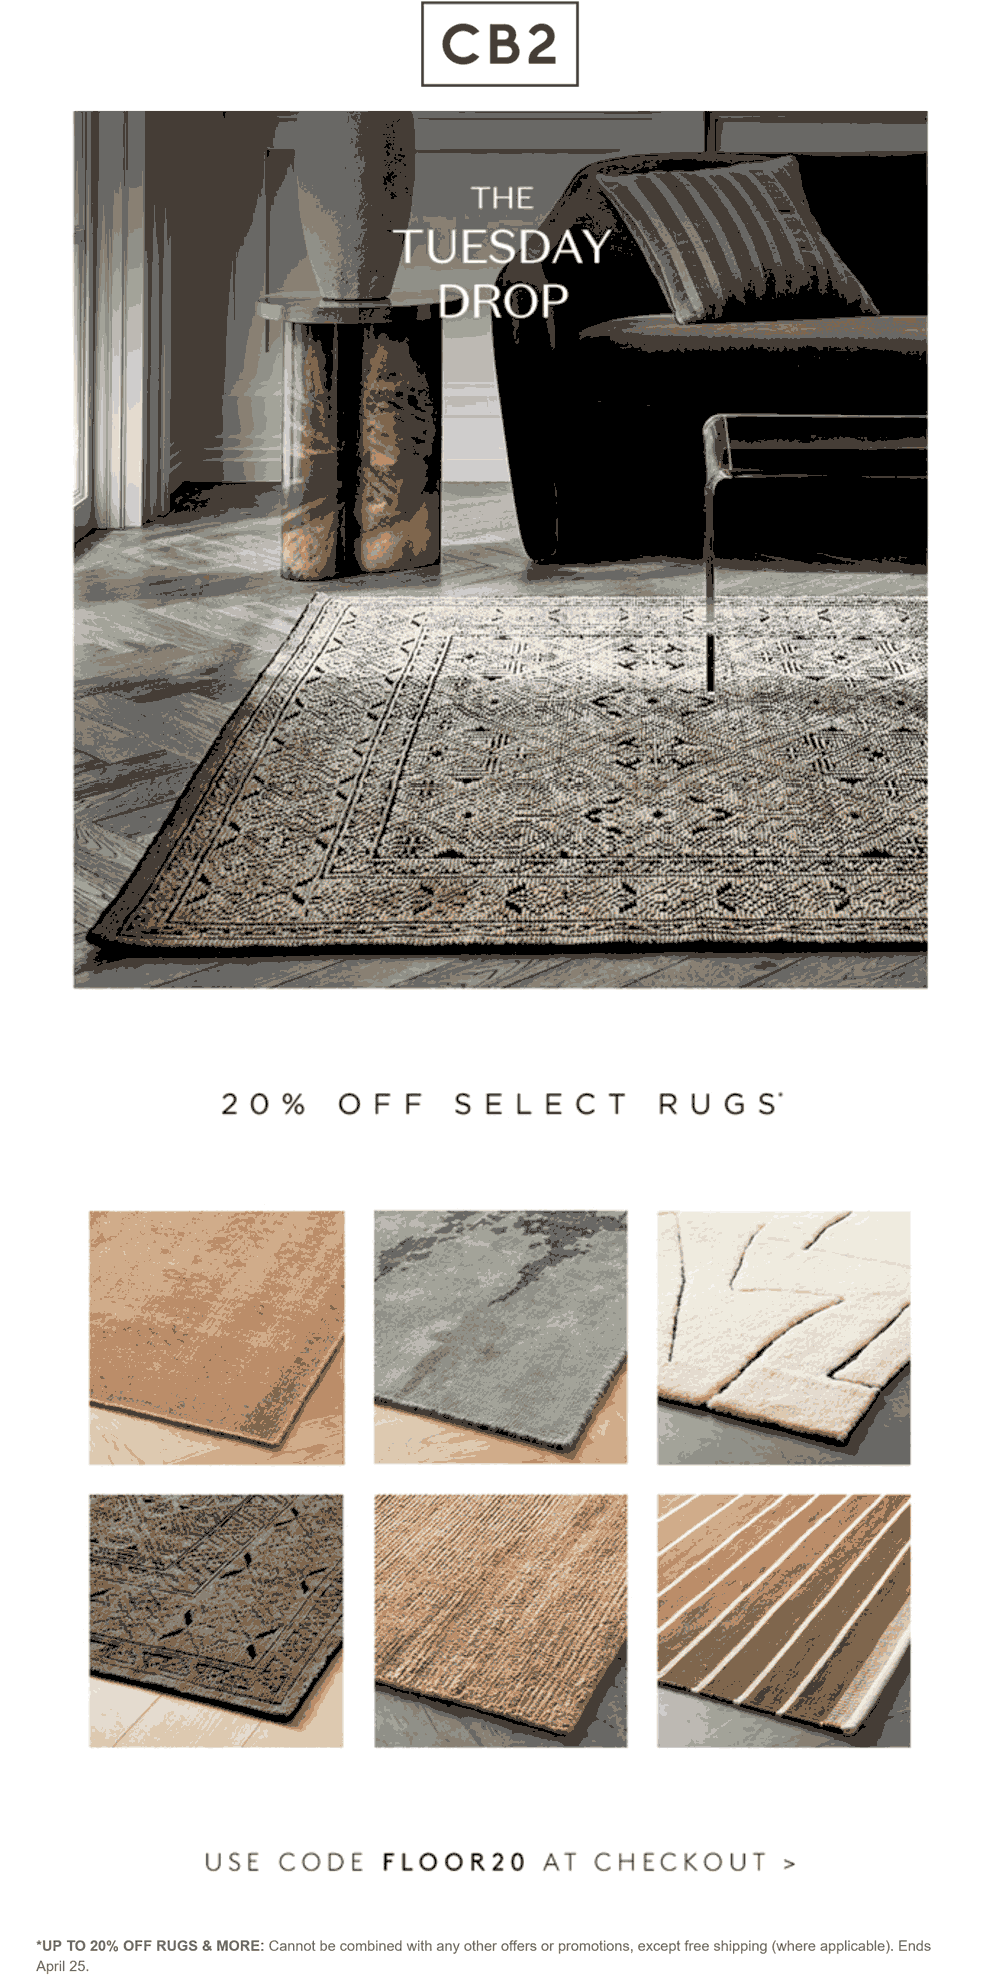 CB2 stores Coupon  20% off rugs today at CB2 via promo code FLOOR20 #cb2 